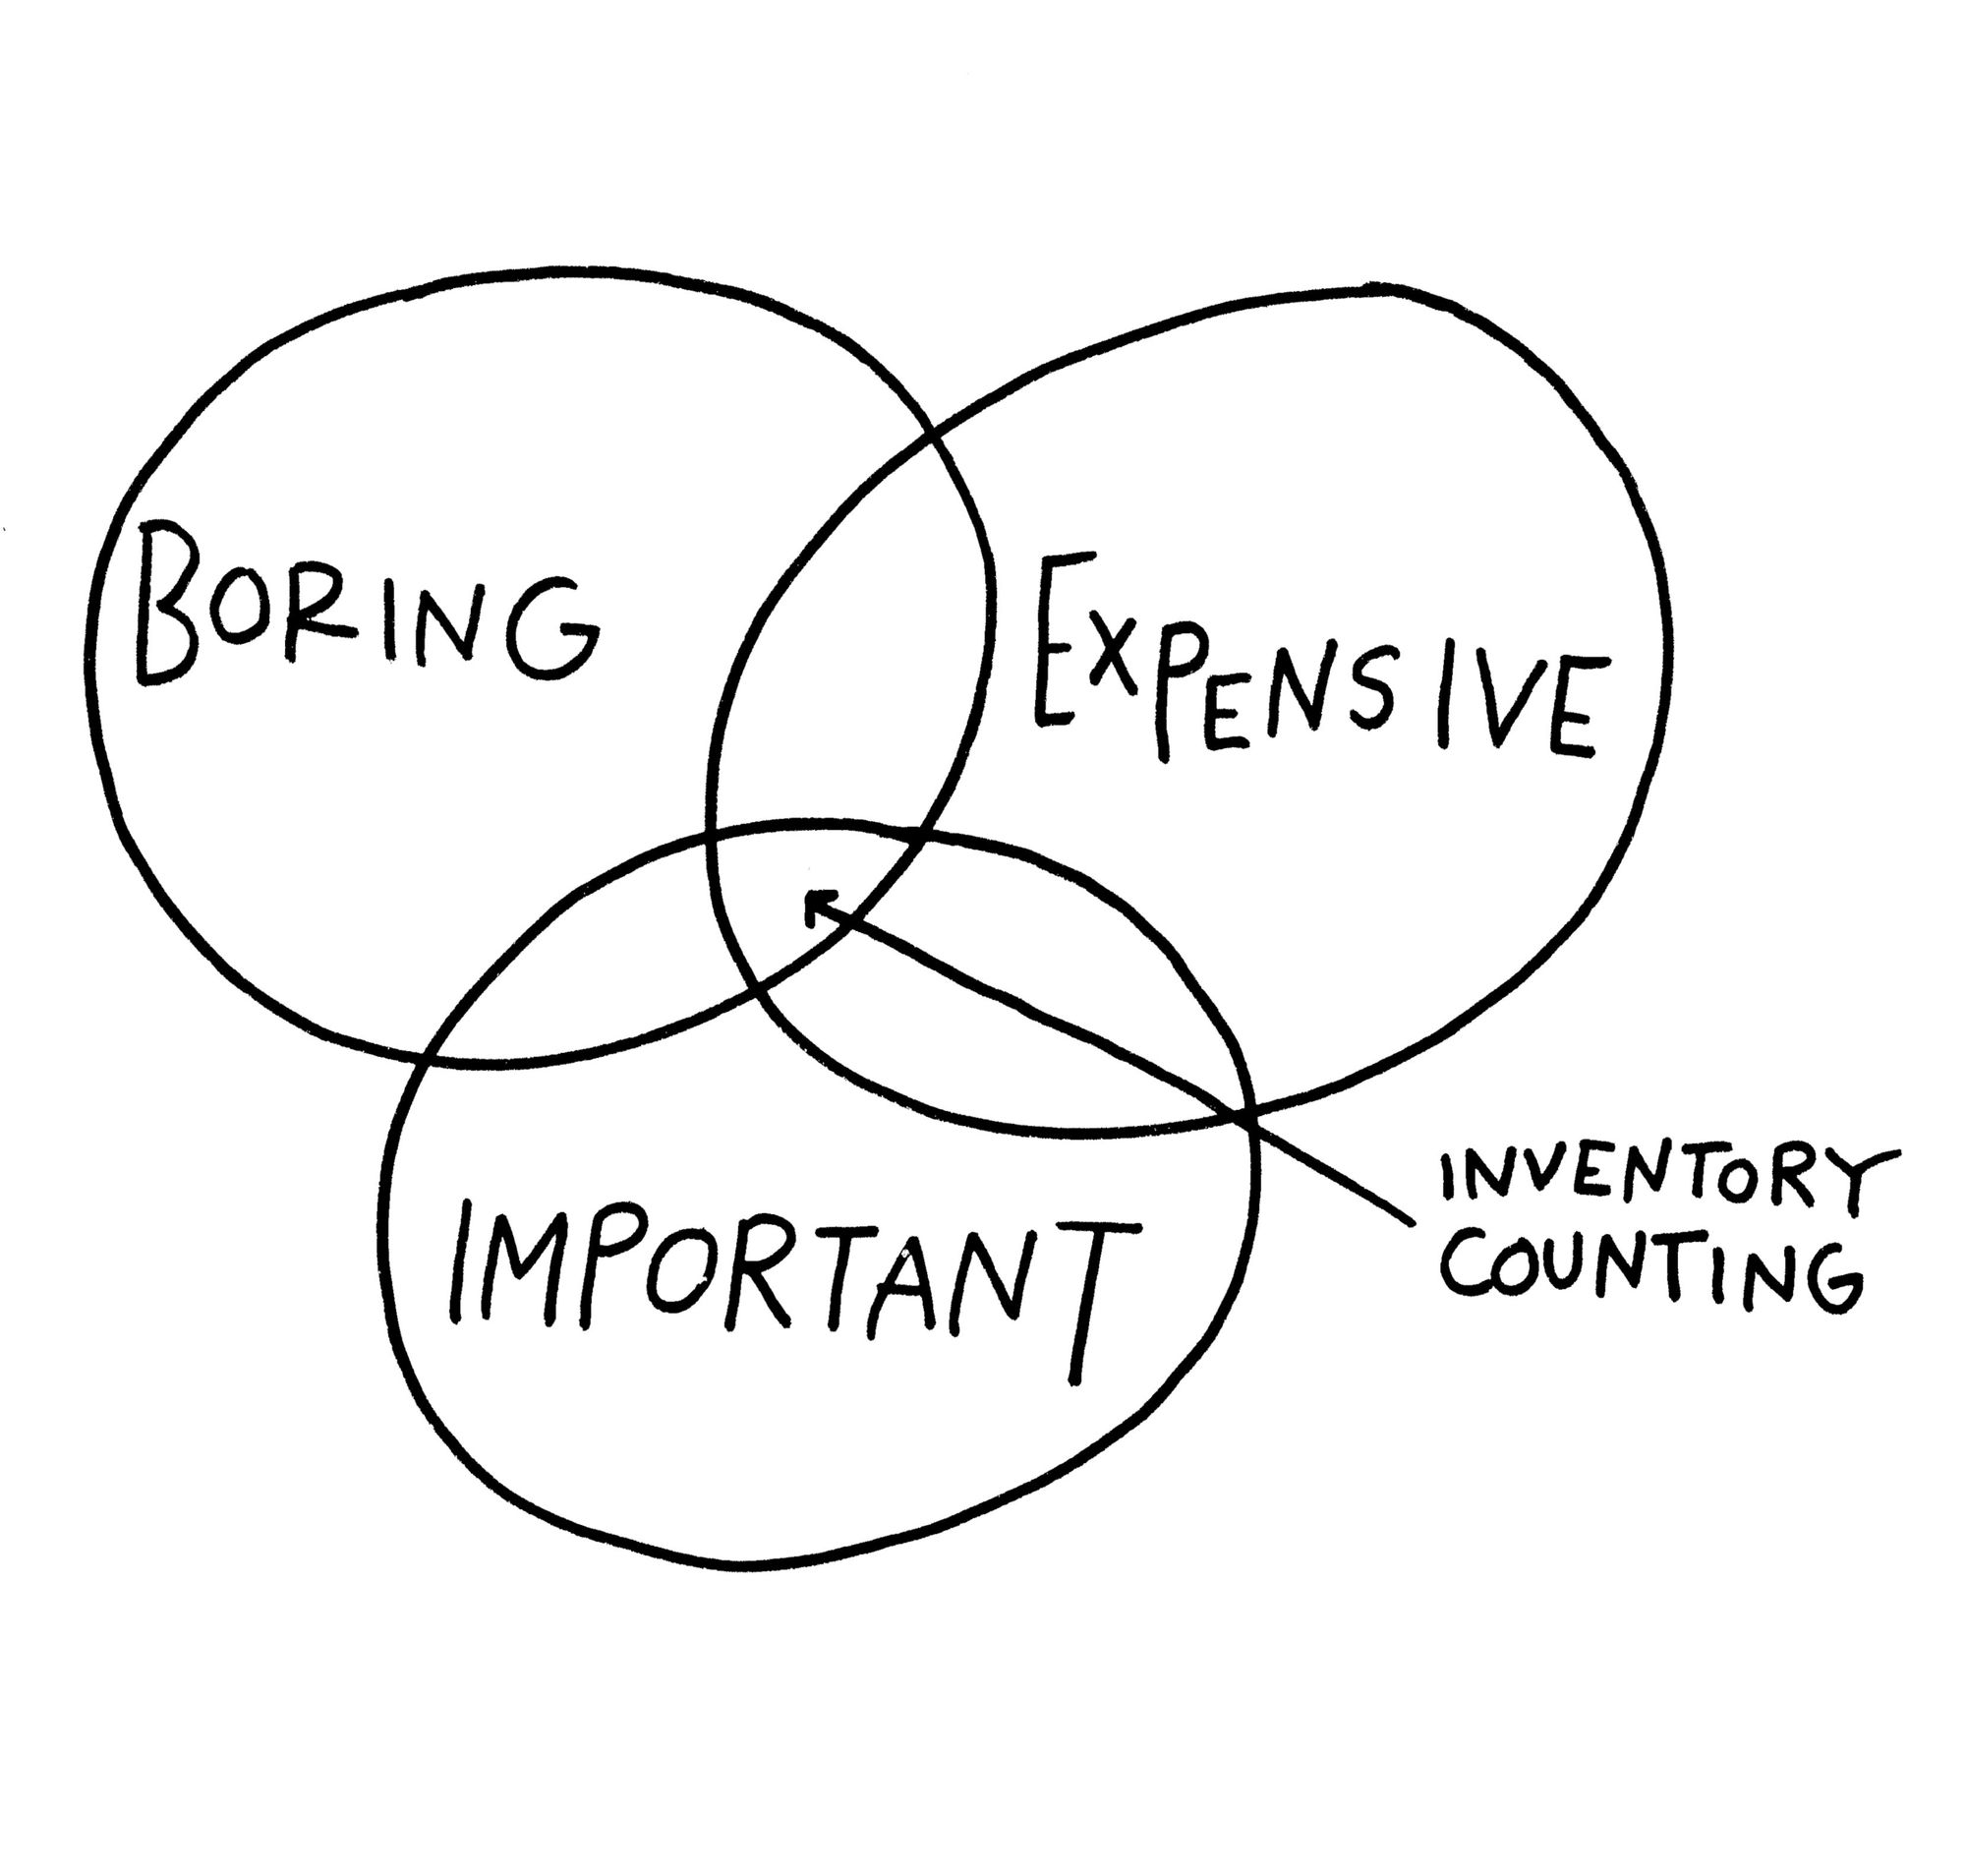 A venn diagram with three circles titled "Boring", "Expensive" and "Important". There is an arrow that points "Inventory Counting" to the intersection of those three.